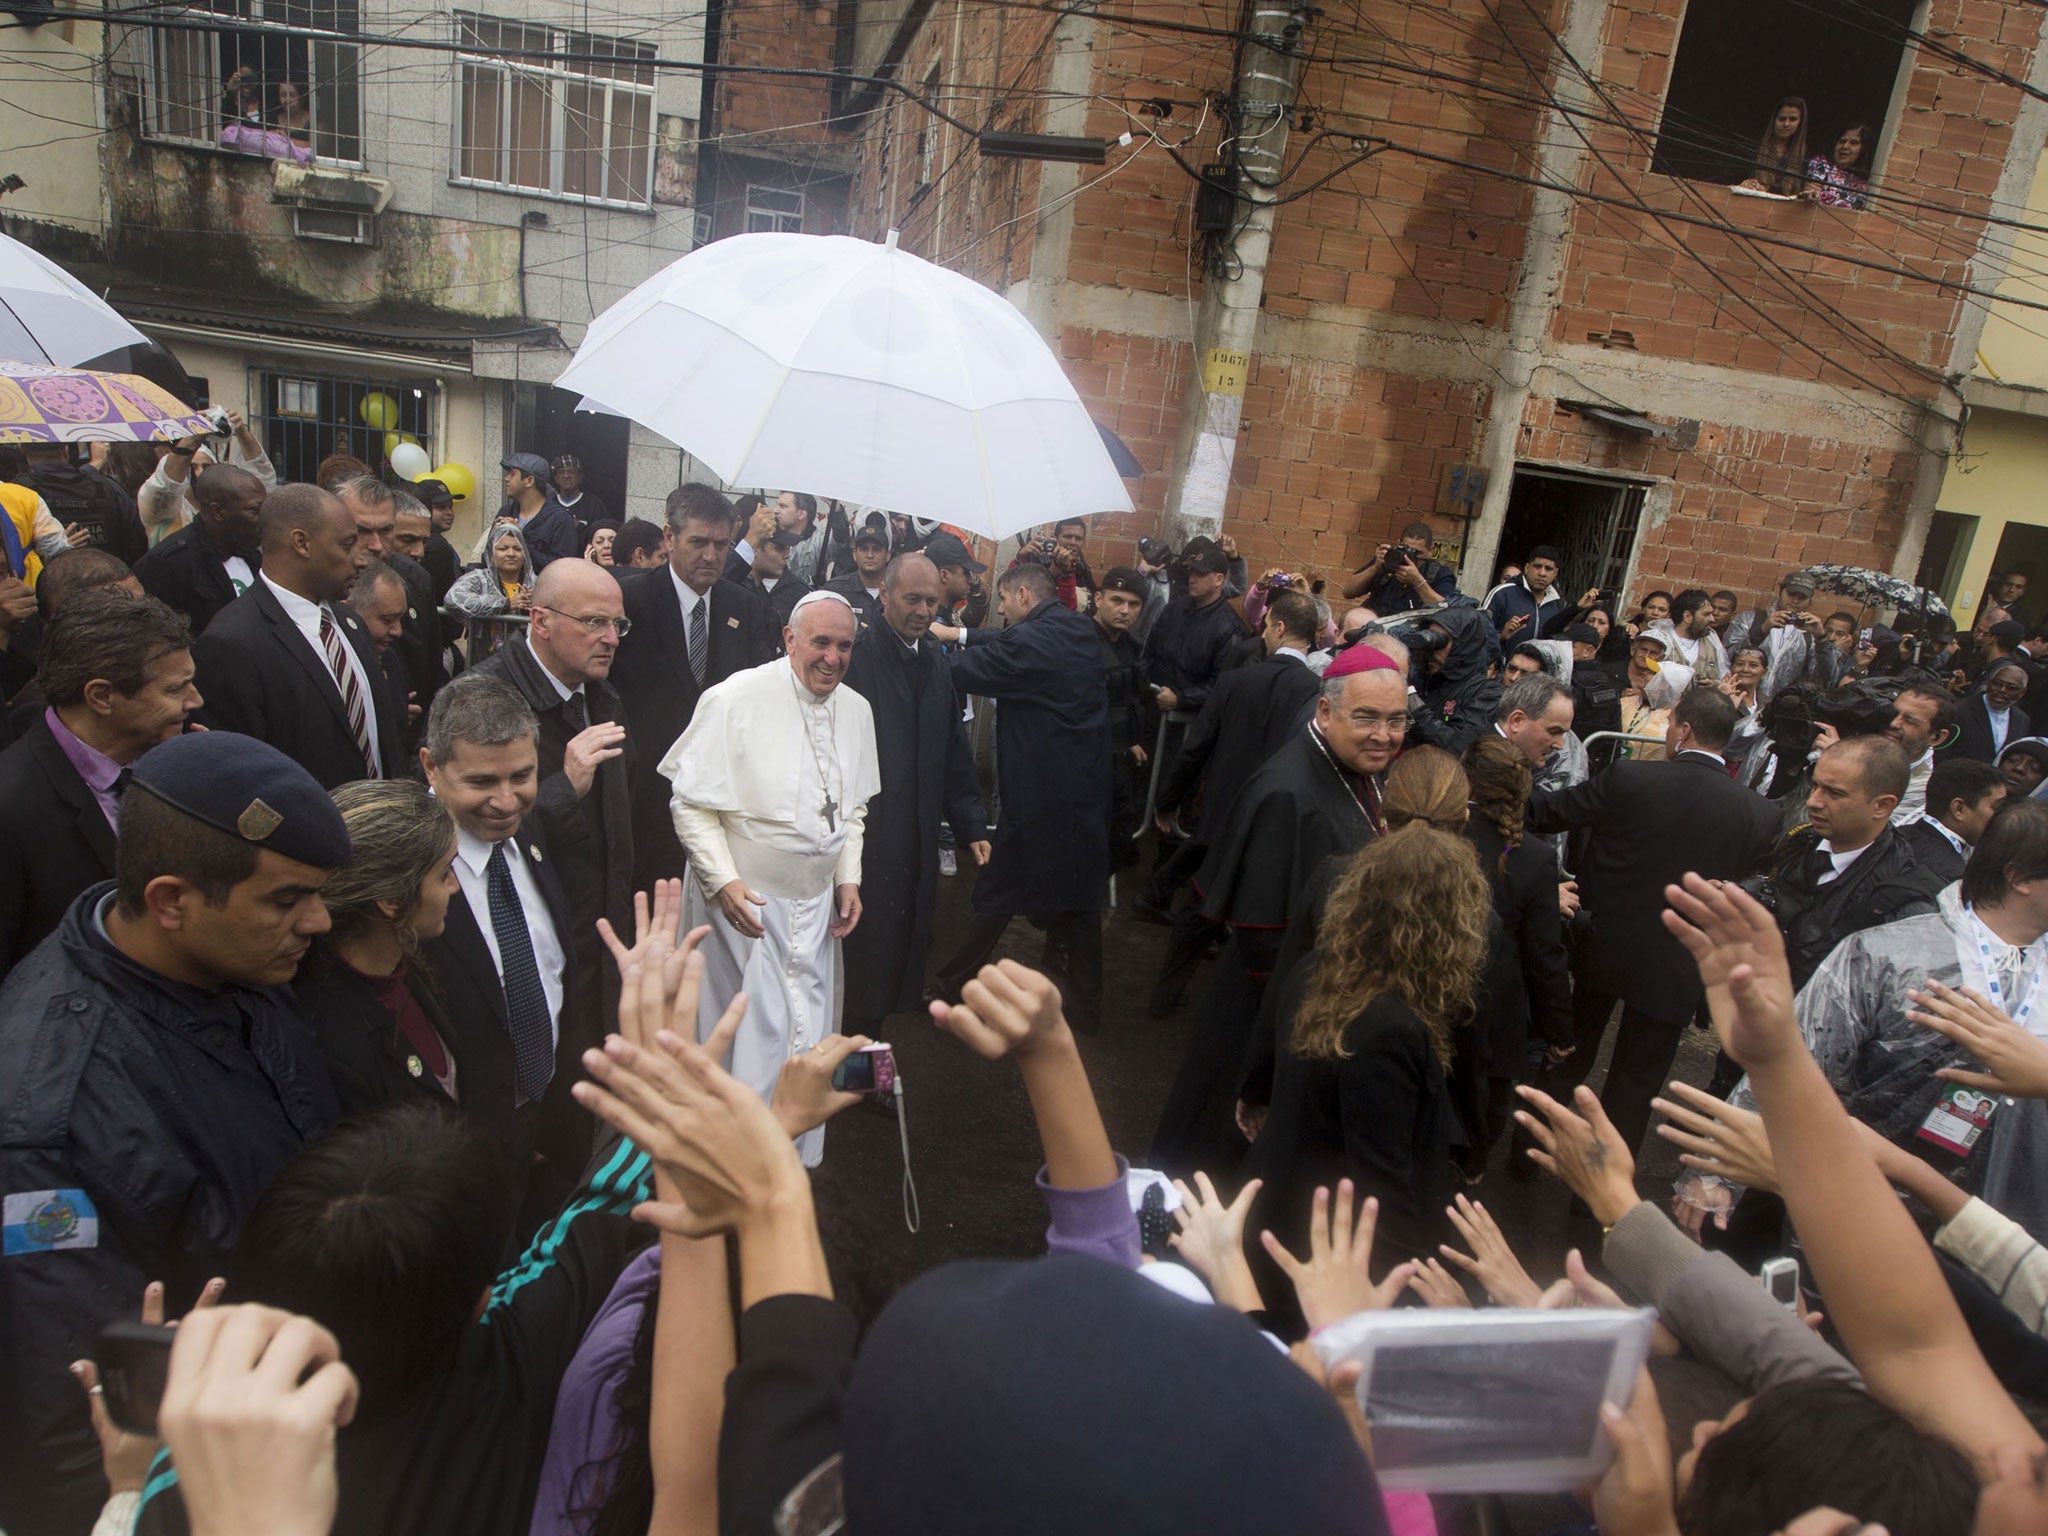 Pope Francis receives a warm welcome as he visits the Varginha slum